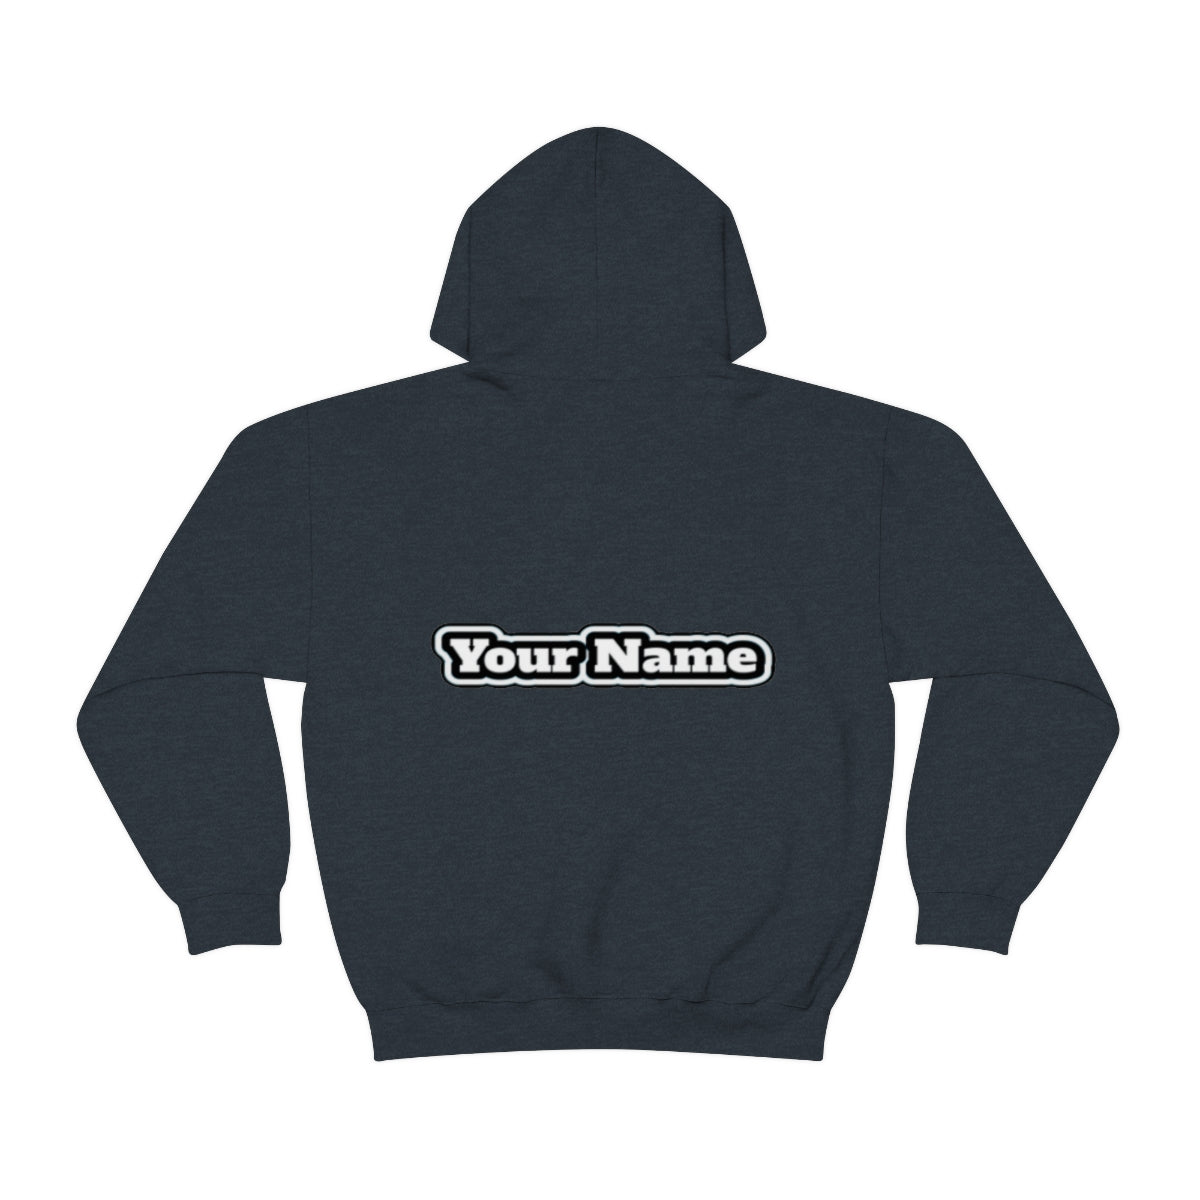 noh Hoodie with Name on Back